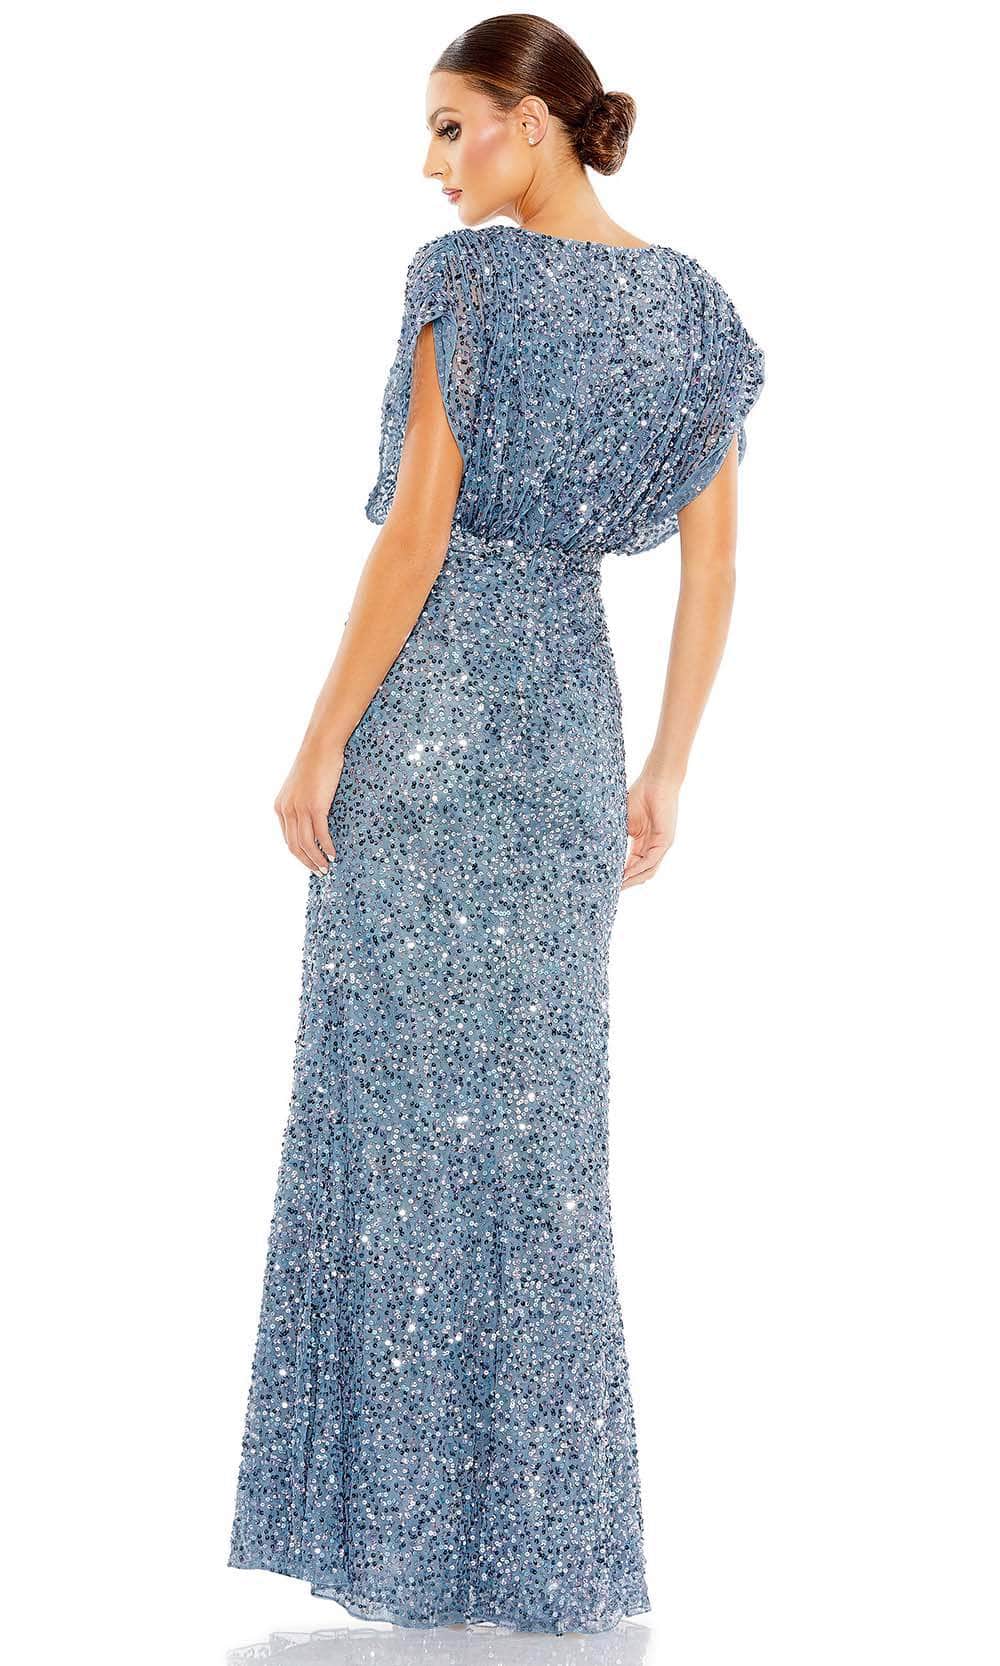 Mac Duggal 5640 - Draped Sleeve Sequin Evening Dress Special Occasion Dress